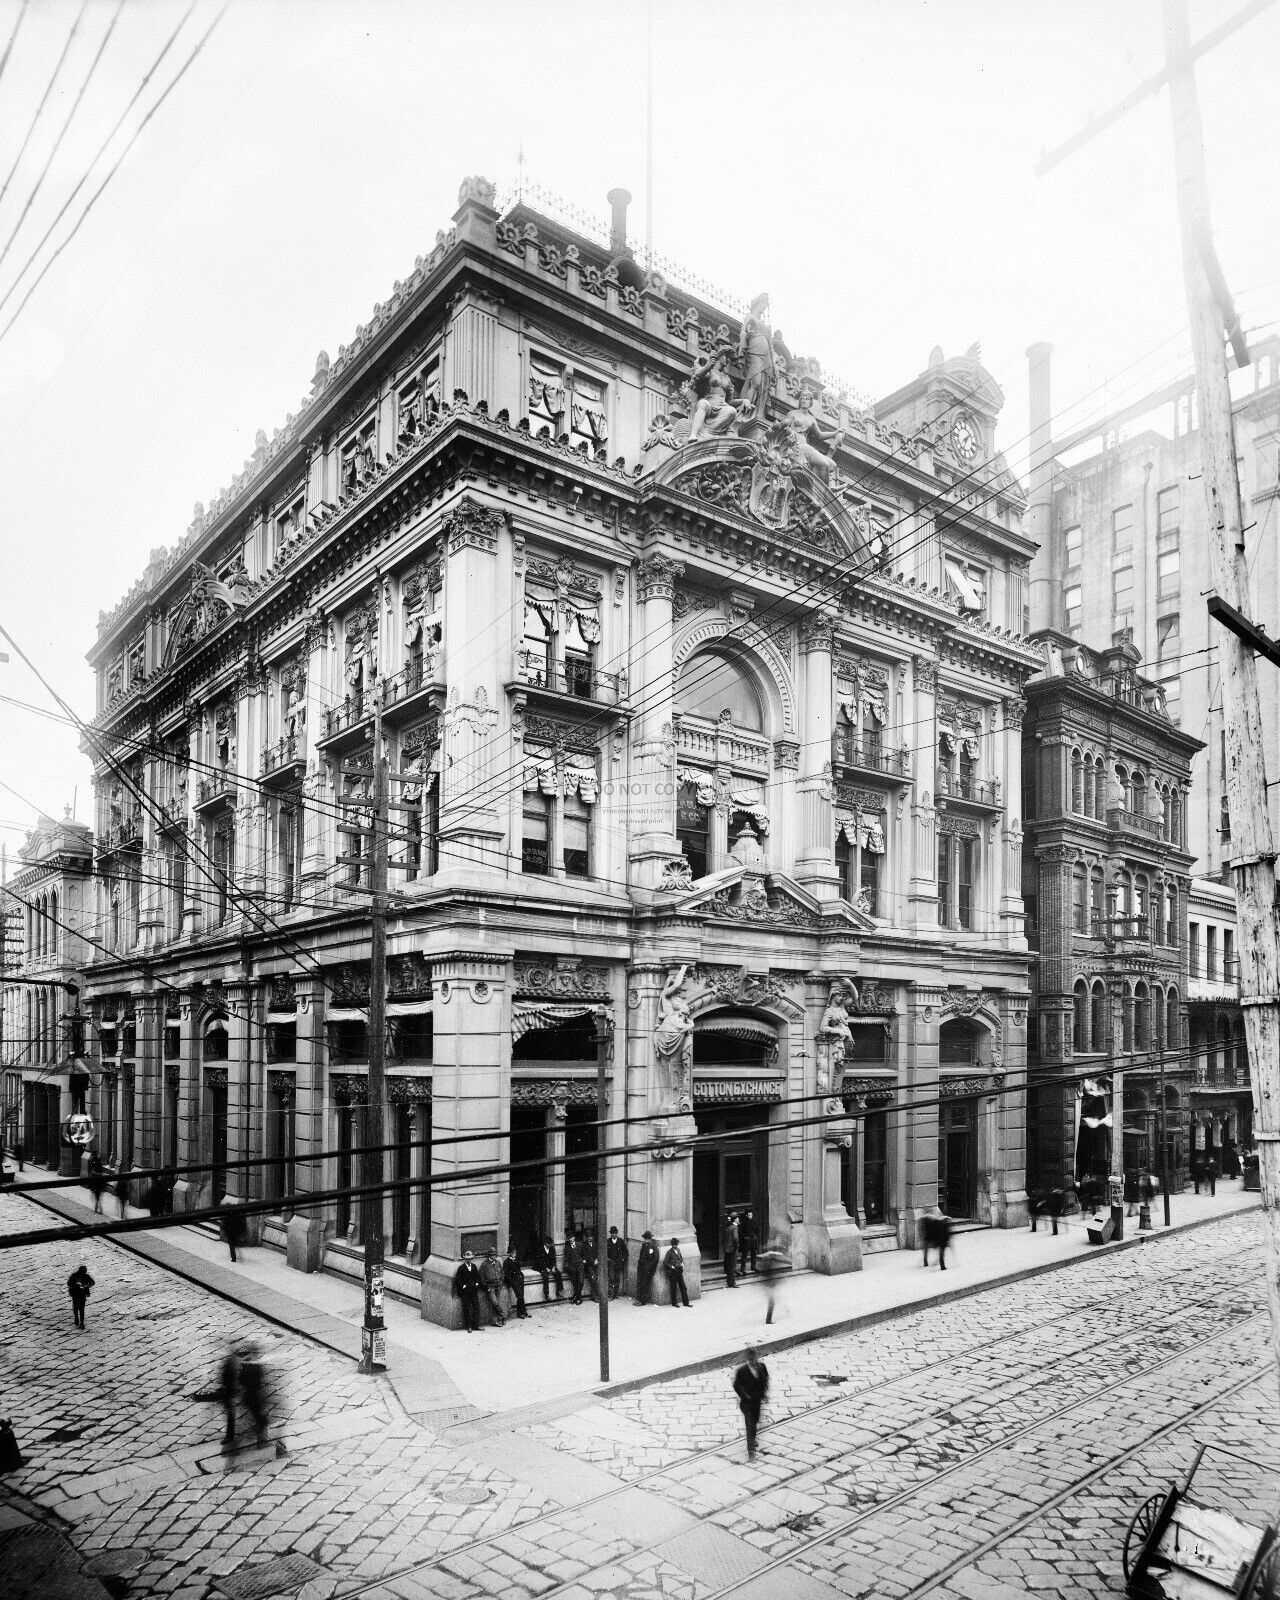 NEW ORLEANS COTTON EXCHANGE BUILDING CIRCA, LATE 1800s - 8X10 PHOTO (OP-849)